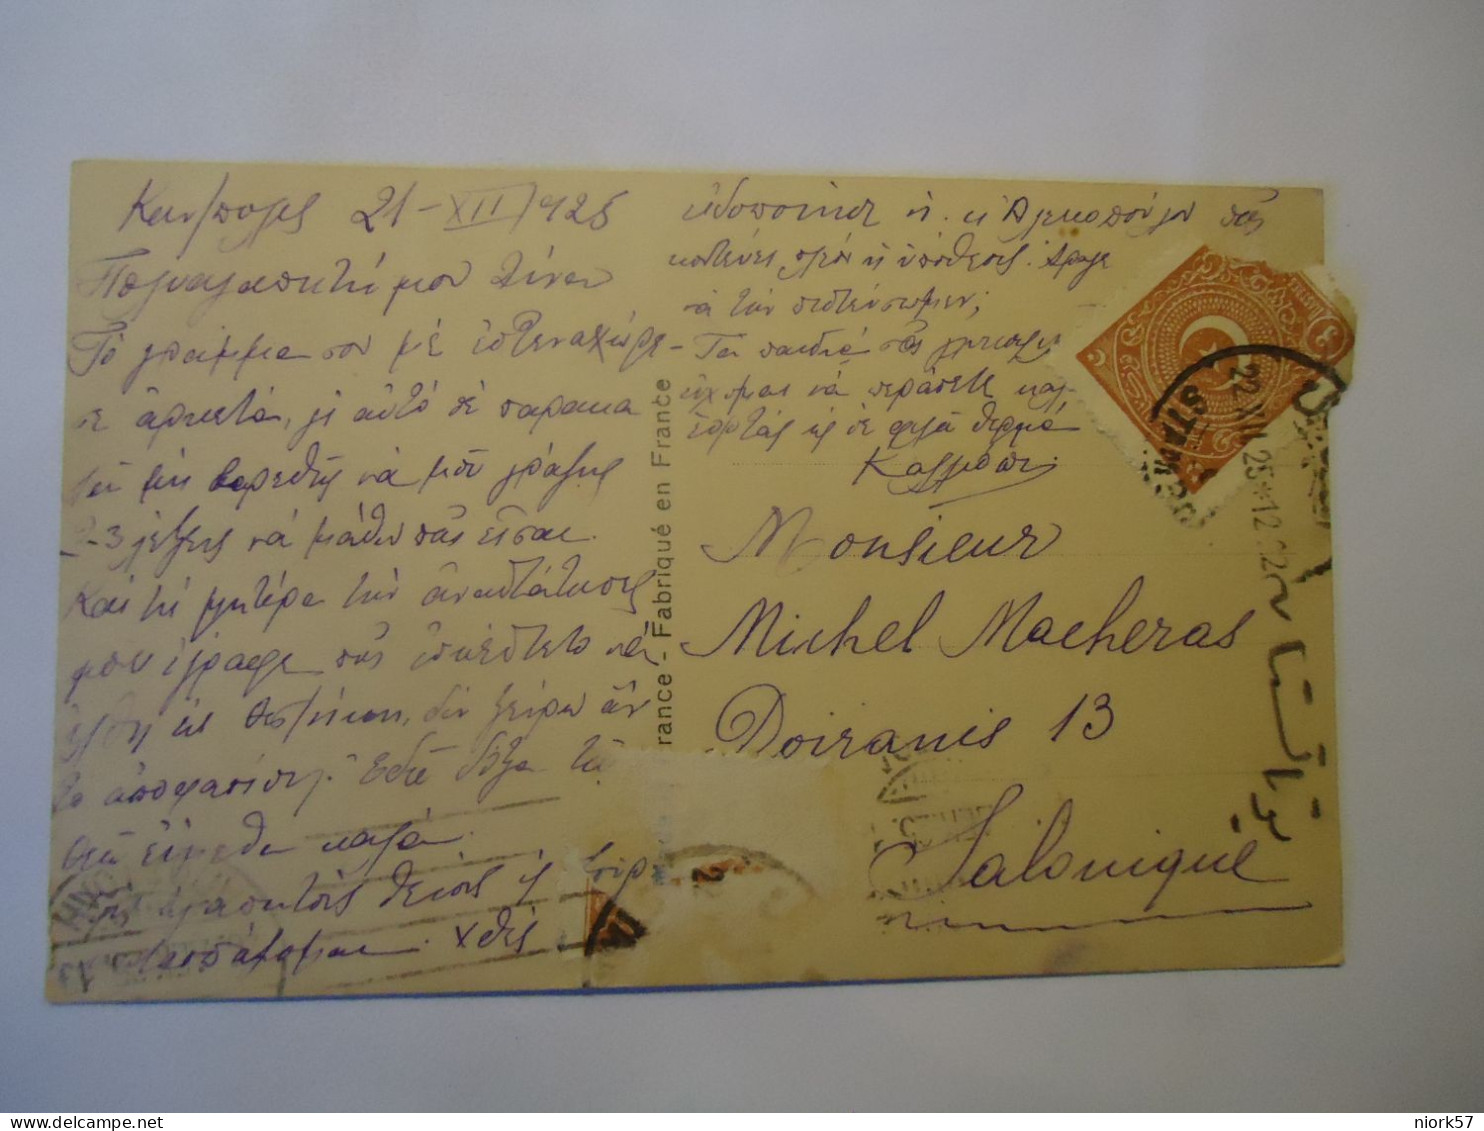 GREECE TURKEY  POSTCARDS  CHILDEN GIRLS 1925  WITH STAMPS AND POSTMARK POSTED ΘΕΣΣΑΛΟΝΙΚΗ - Griechenland